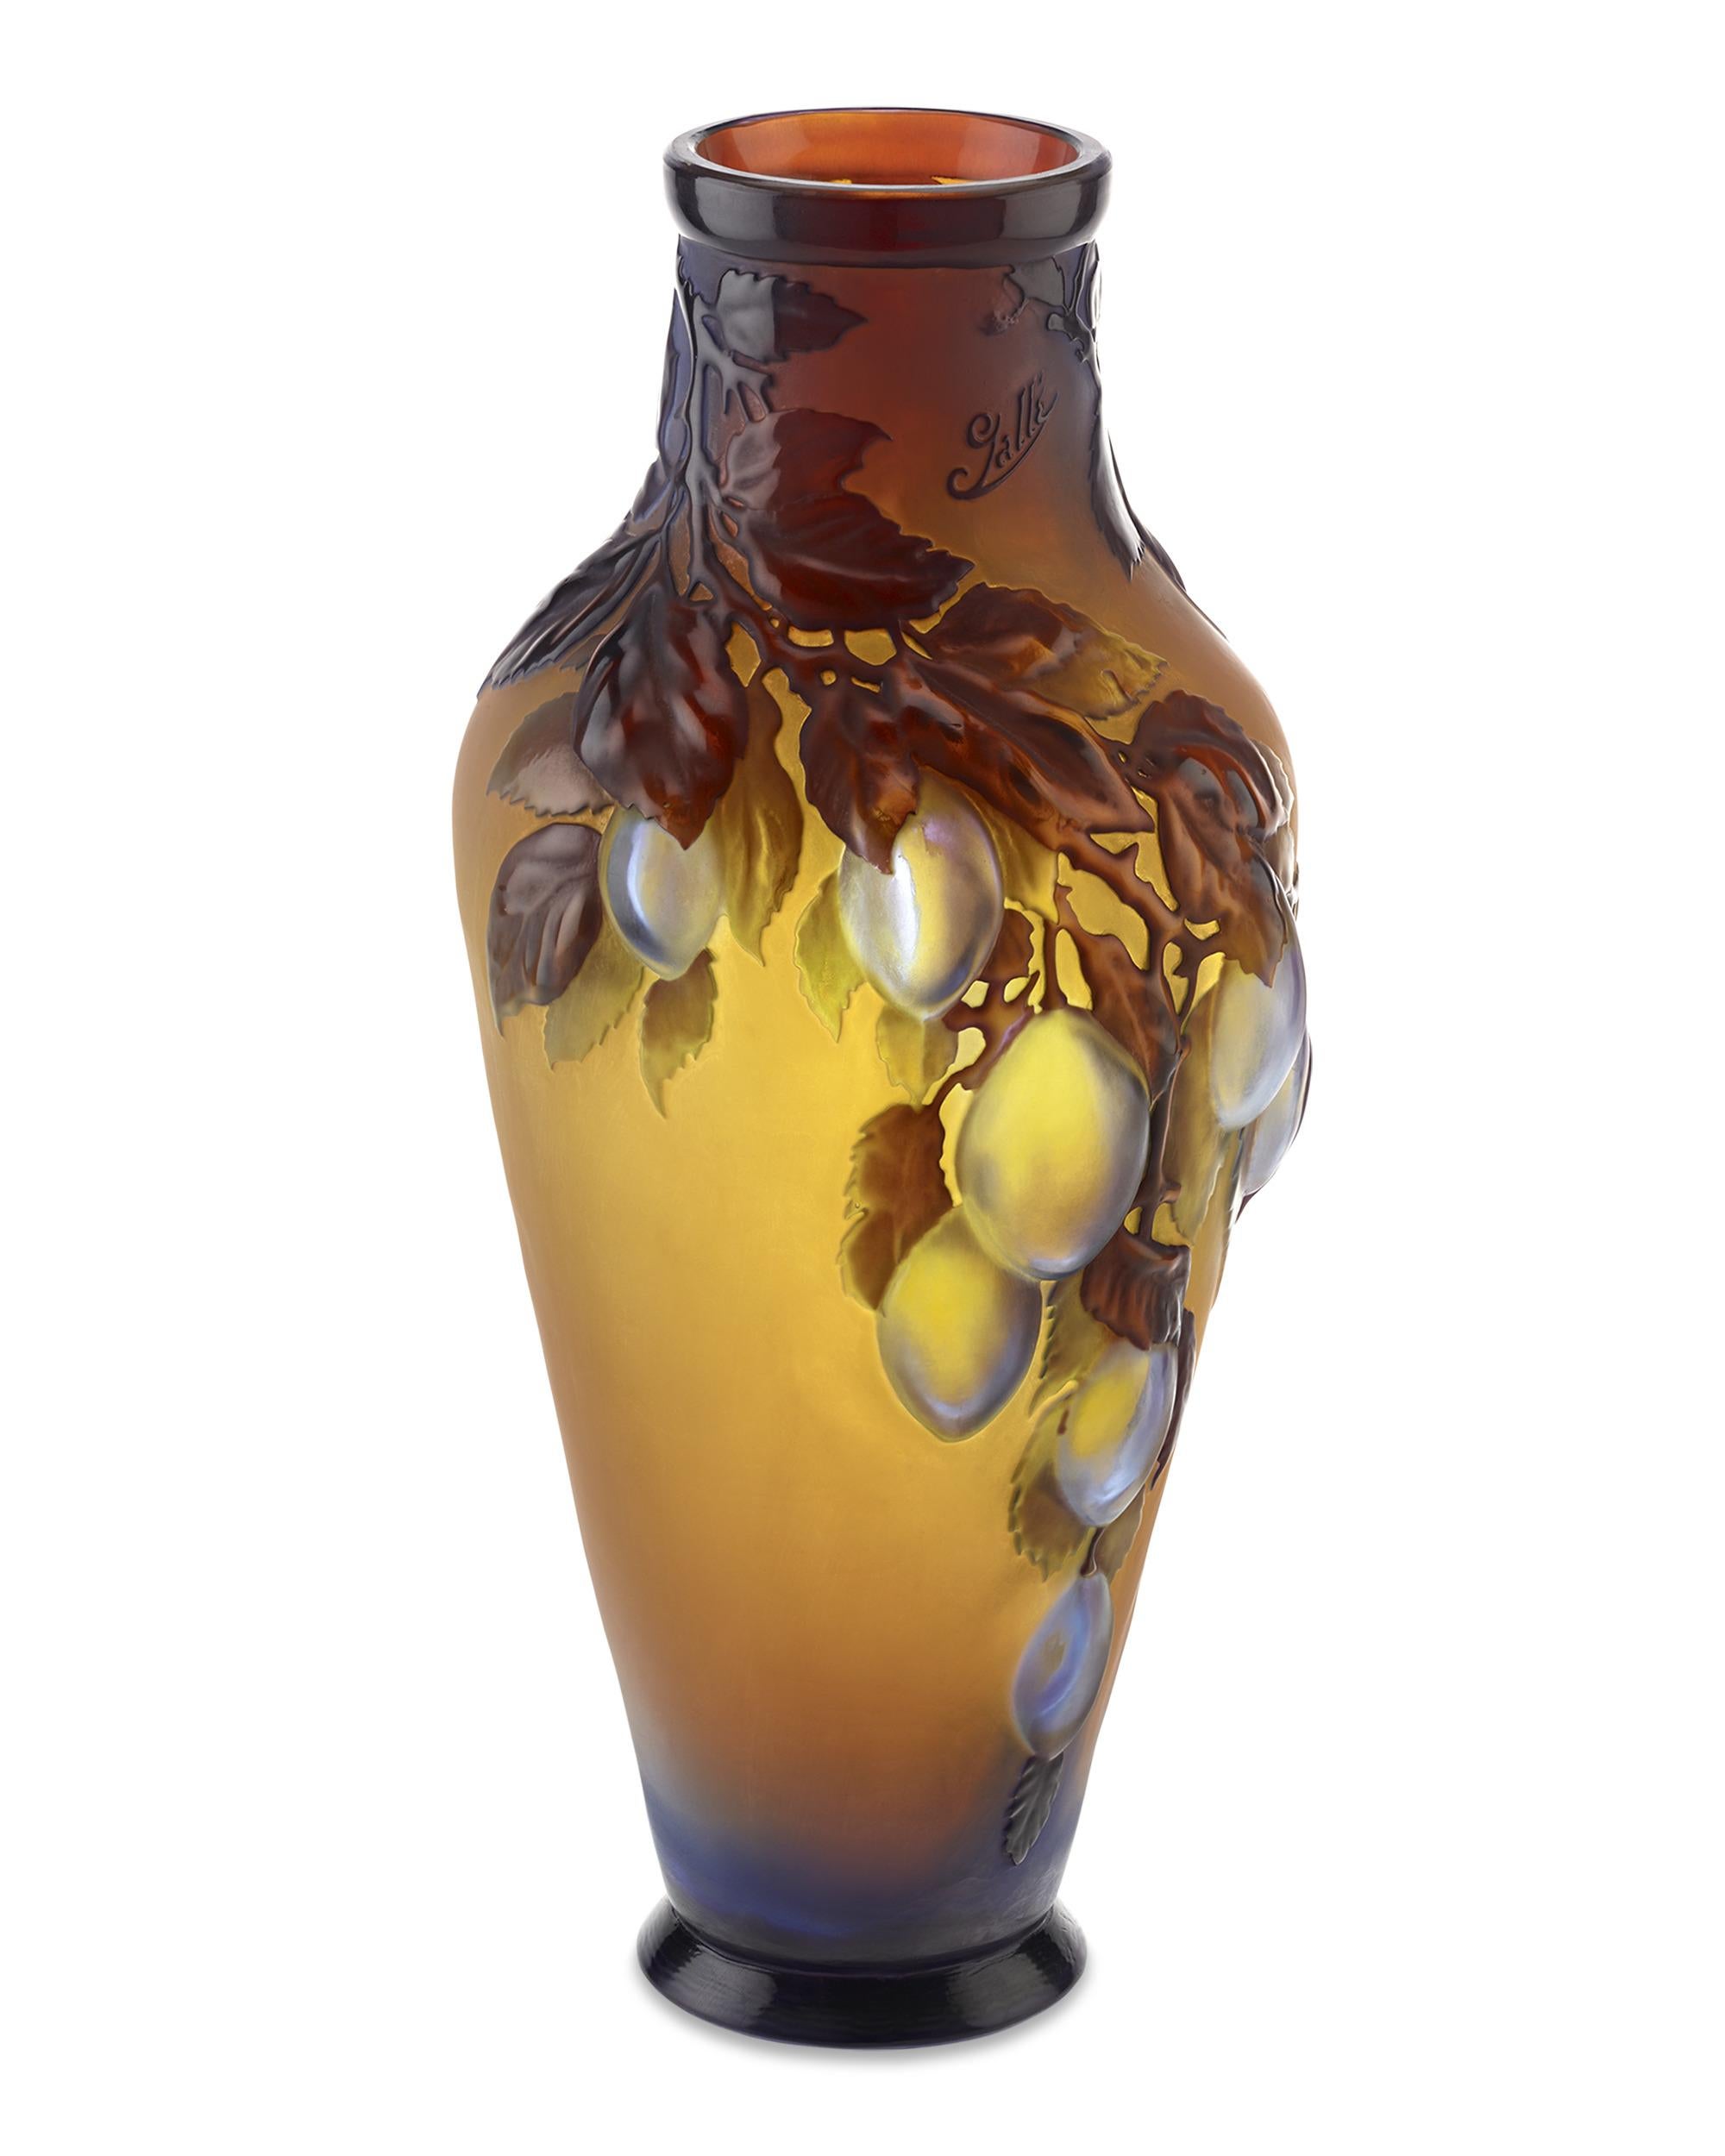 This rare cameo glass vase by the French glassmaker Émile Gallé features an exceptional mold-blown design of a fruiting plum tree. While the majority of Gallé vases were blown into molds before being carved or enameled, only a very small handful